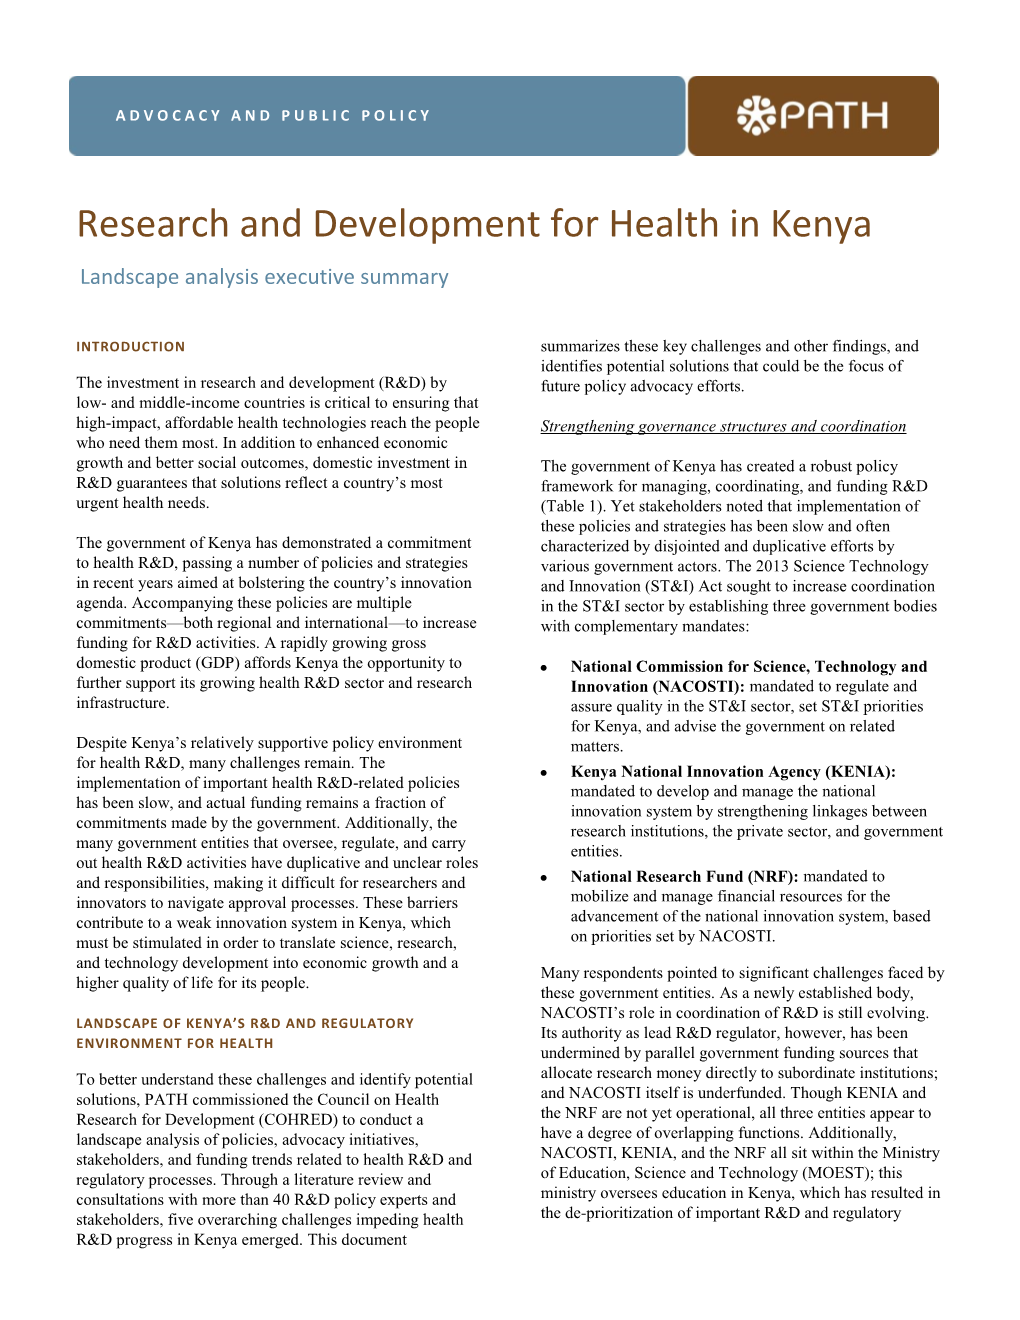 Research and Development for Health in Kenya Landscape Analysis Executive Summary